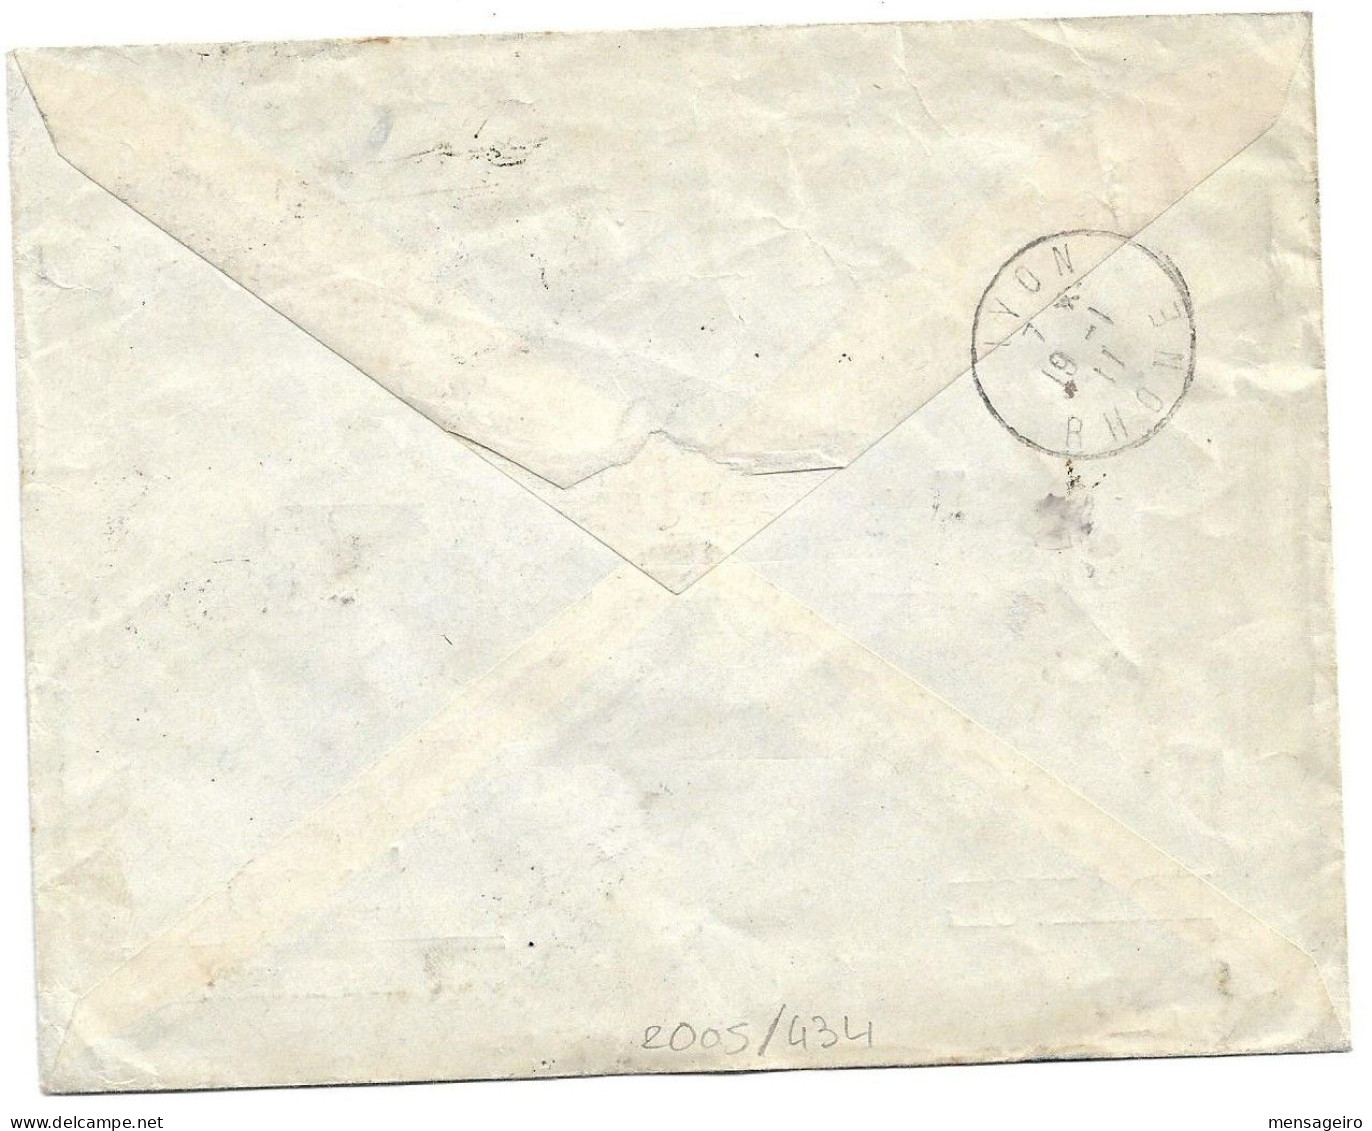 (C04) REGISTRED COVER WITH 1P. +5M. X2 STAMPS - CAIRO / R => FRANCE 1911 - 1866-1914 Khedivate Of Egypt